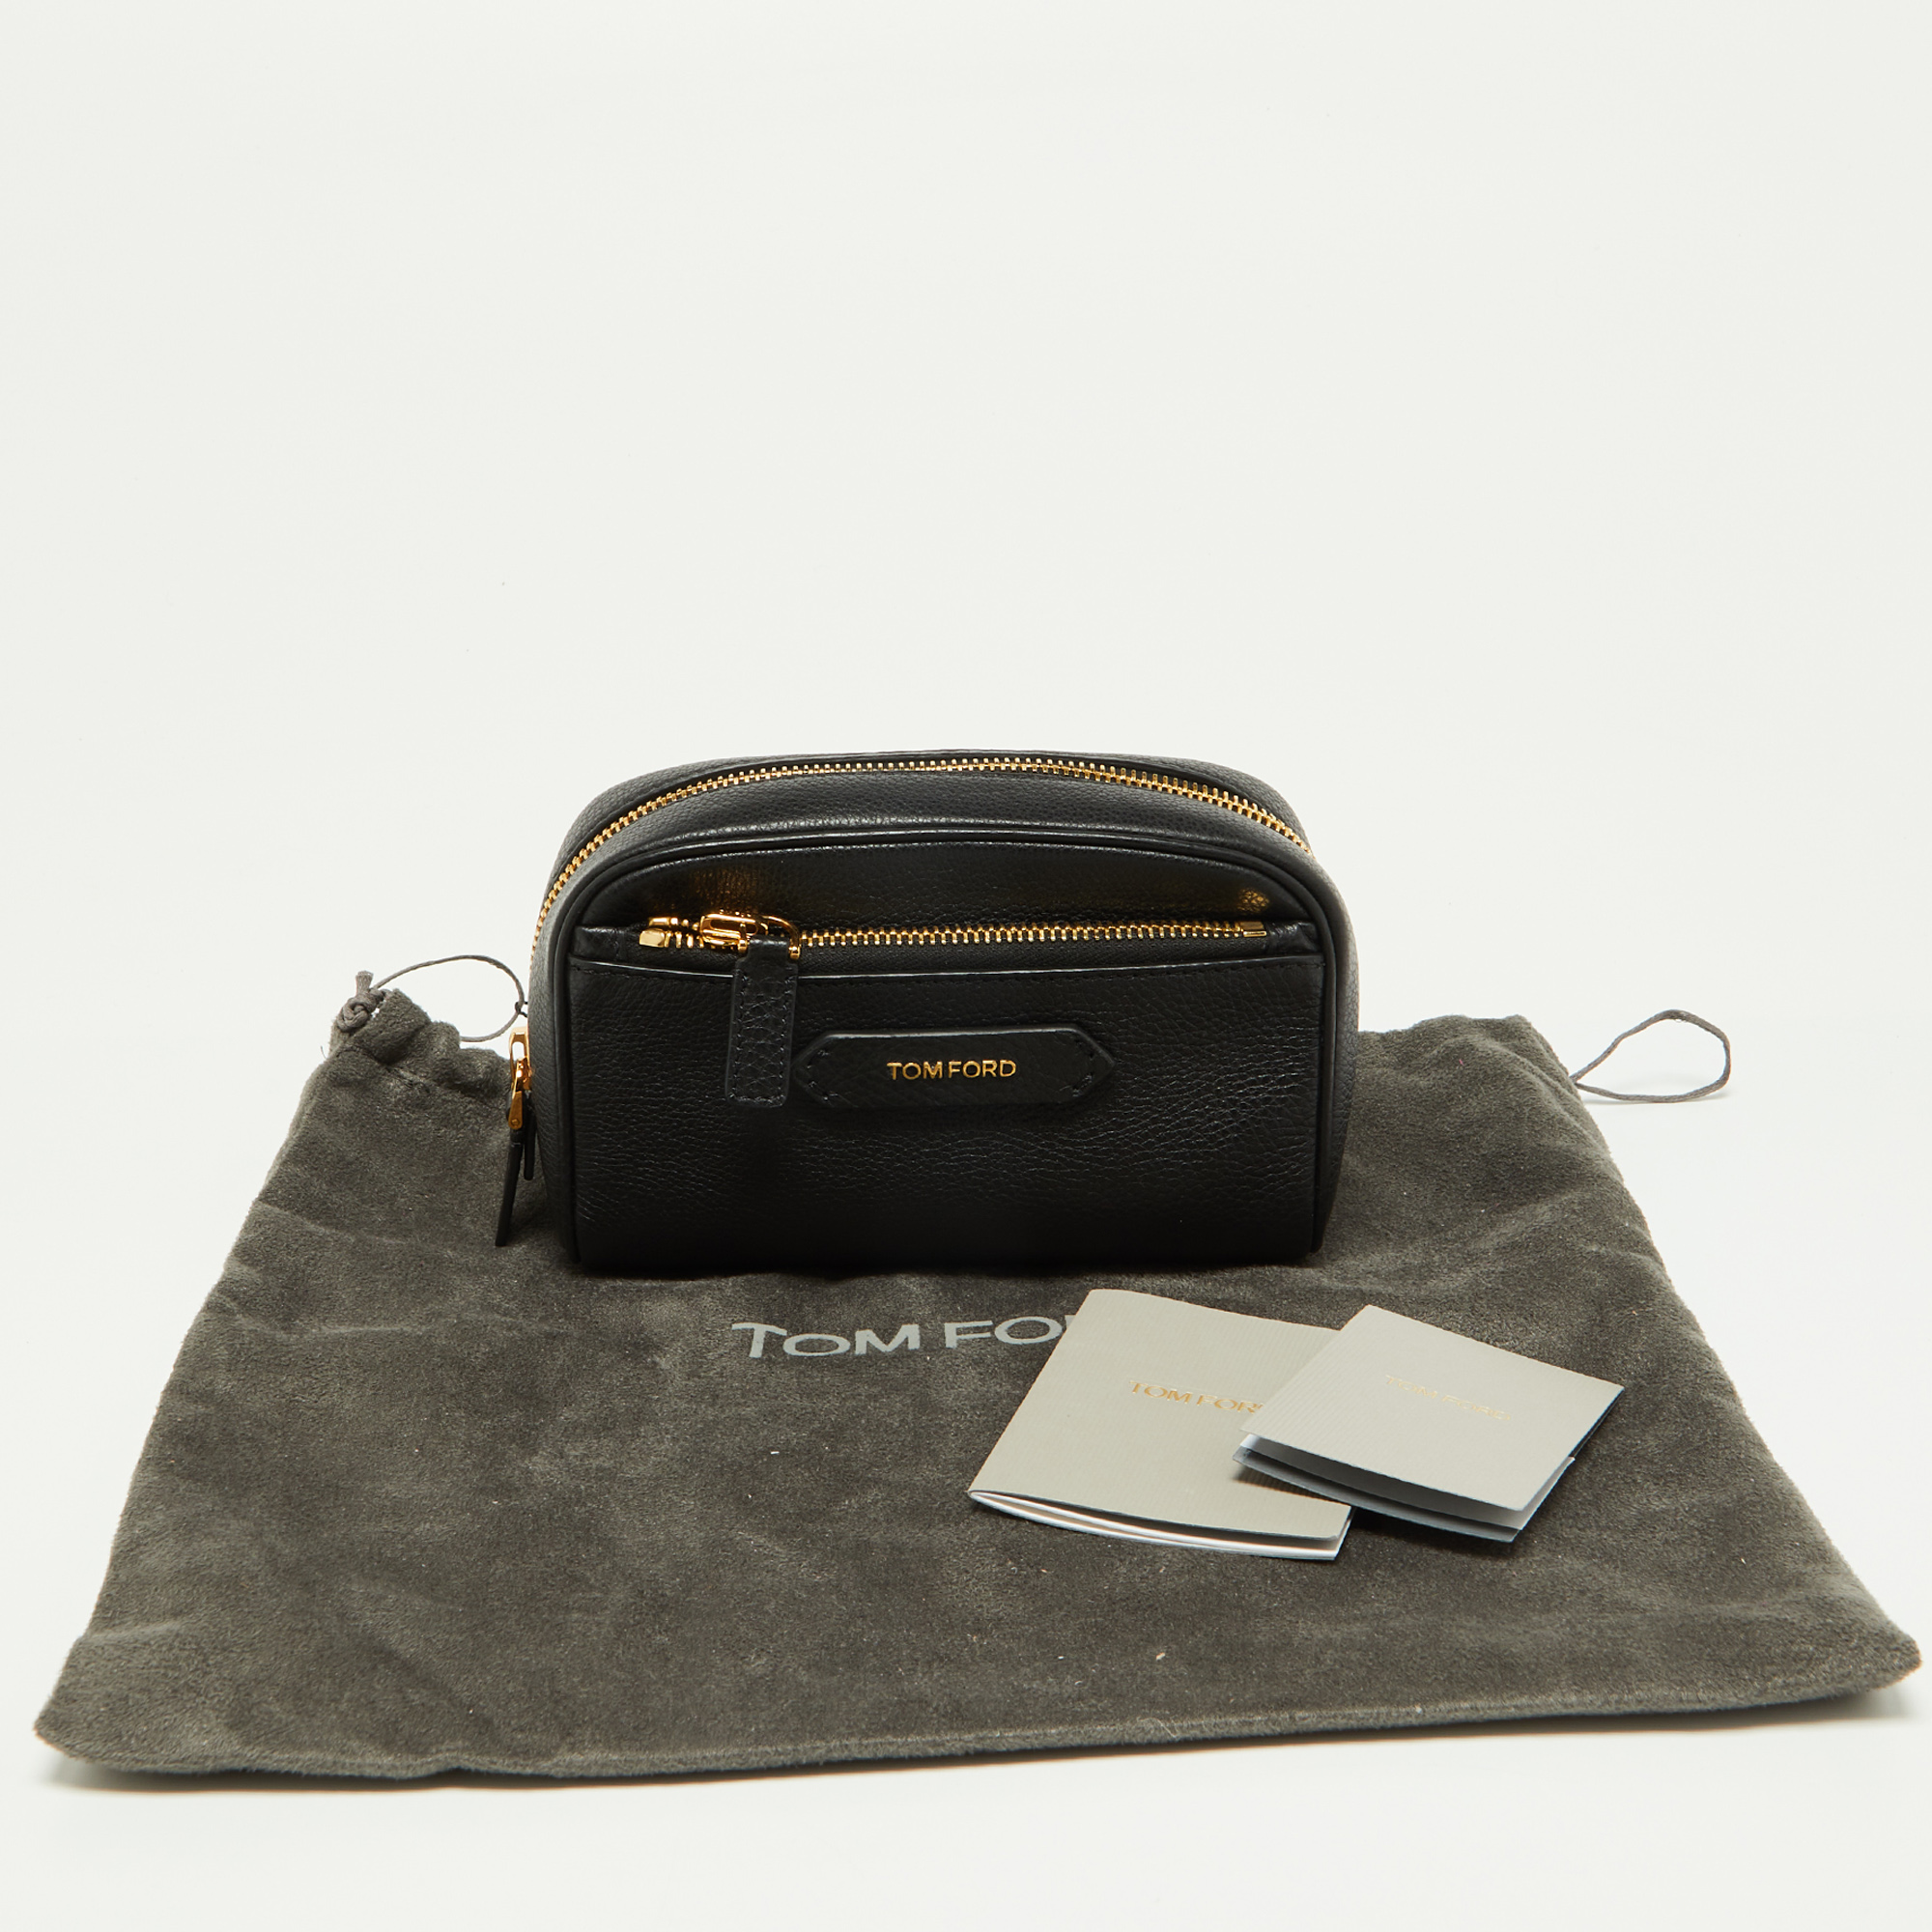 Tom Ford Black Leather Zip Pouch